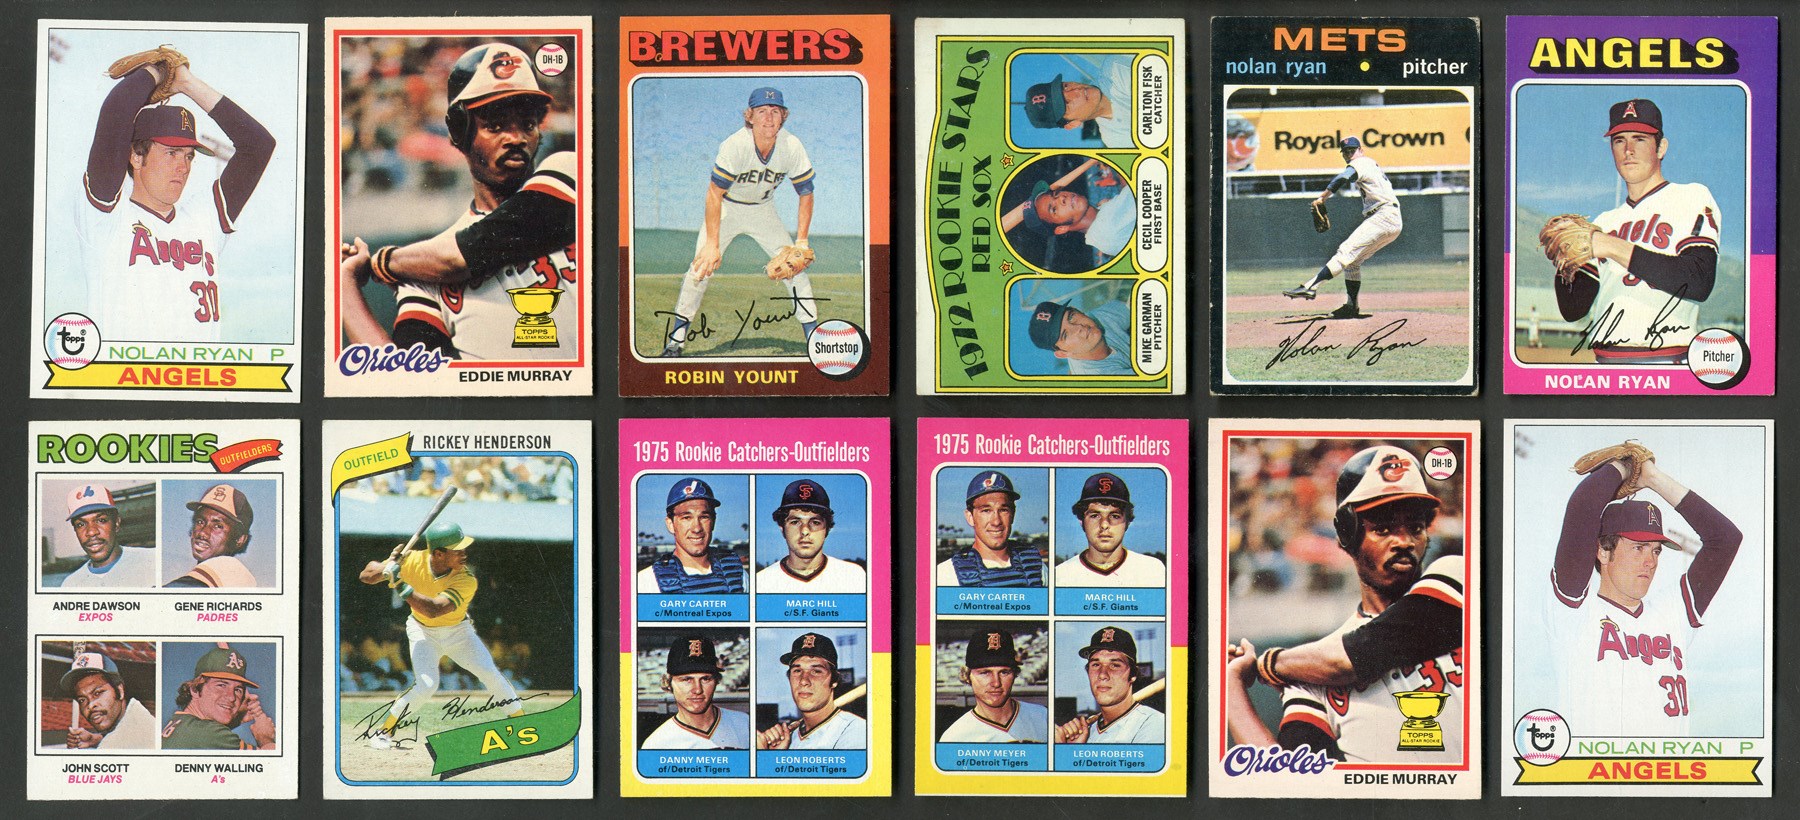 Baseball and Trading Cards - 1970s-80s Topps Collection with Major Stars & Rookies (100+)